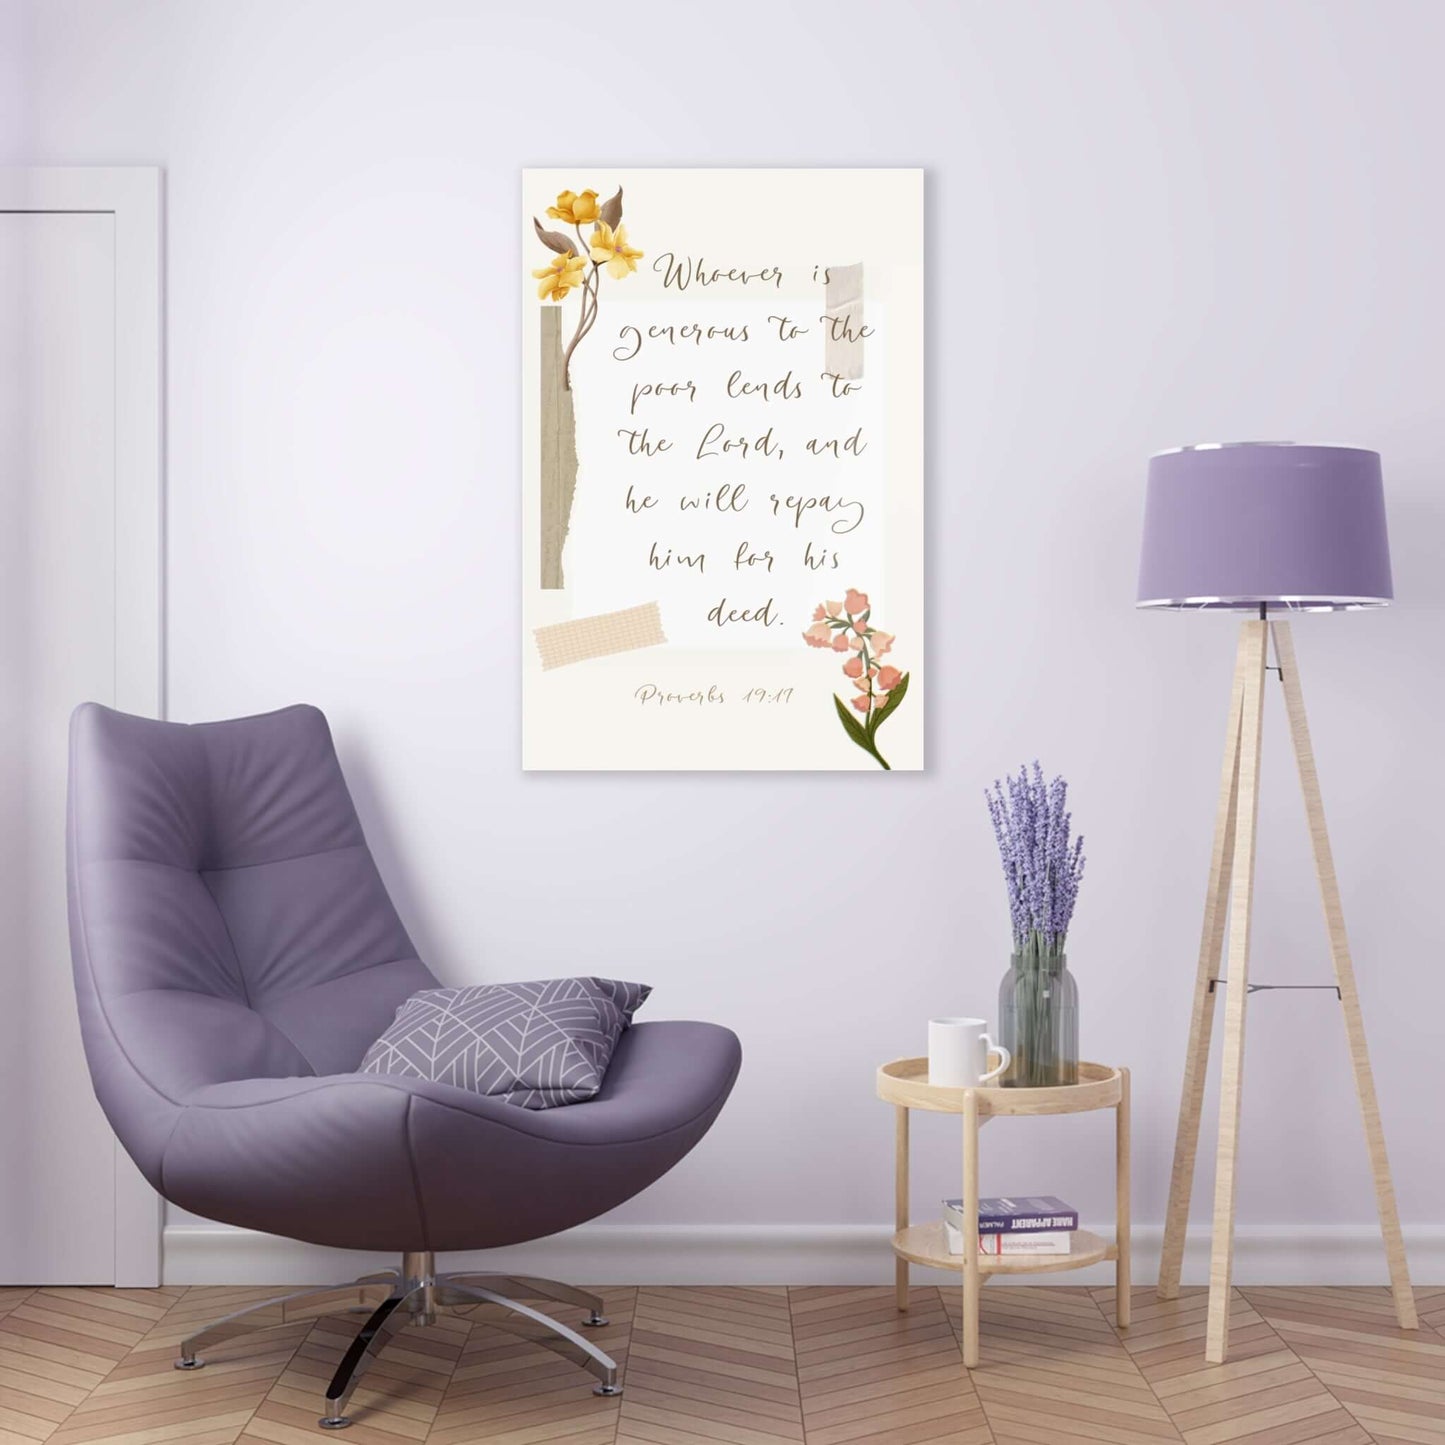 Dazzling Art for Room: "Generous to the Poor" Acrylic Wall Art Print | Art & Wall Decor,Assembled in the USA,Assembled in USA,Decor,Home & Living,Home Decor,Indoor,Made in the USA,Made in USA,Poster